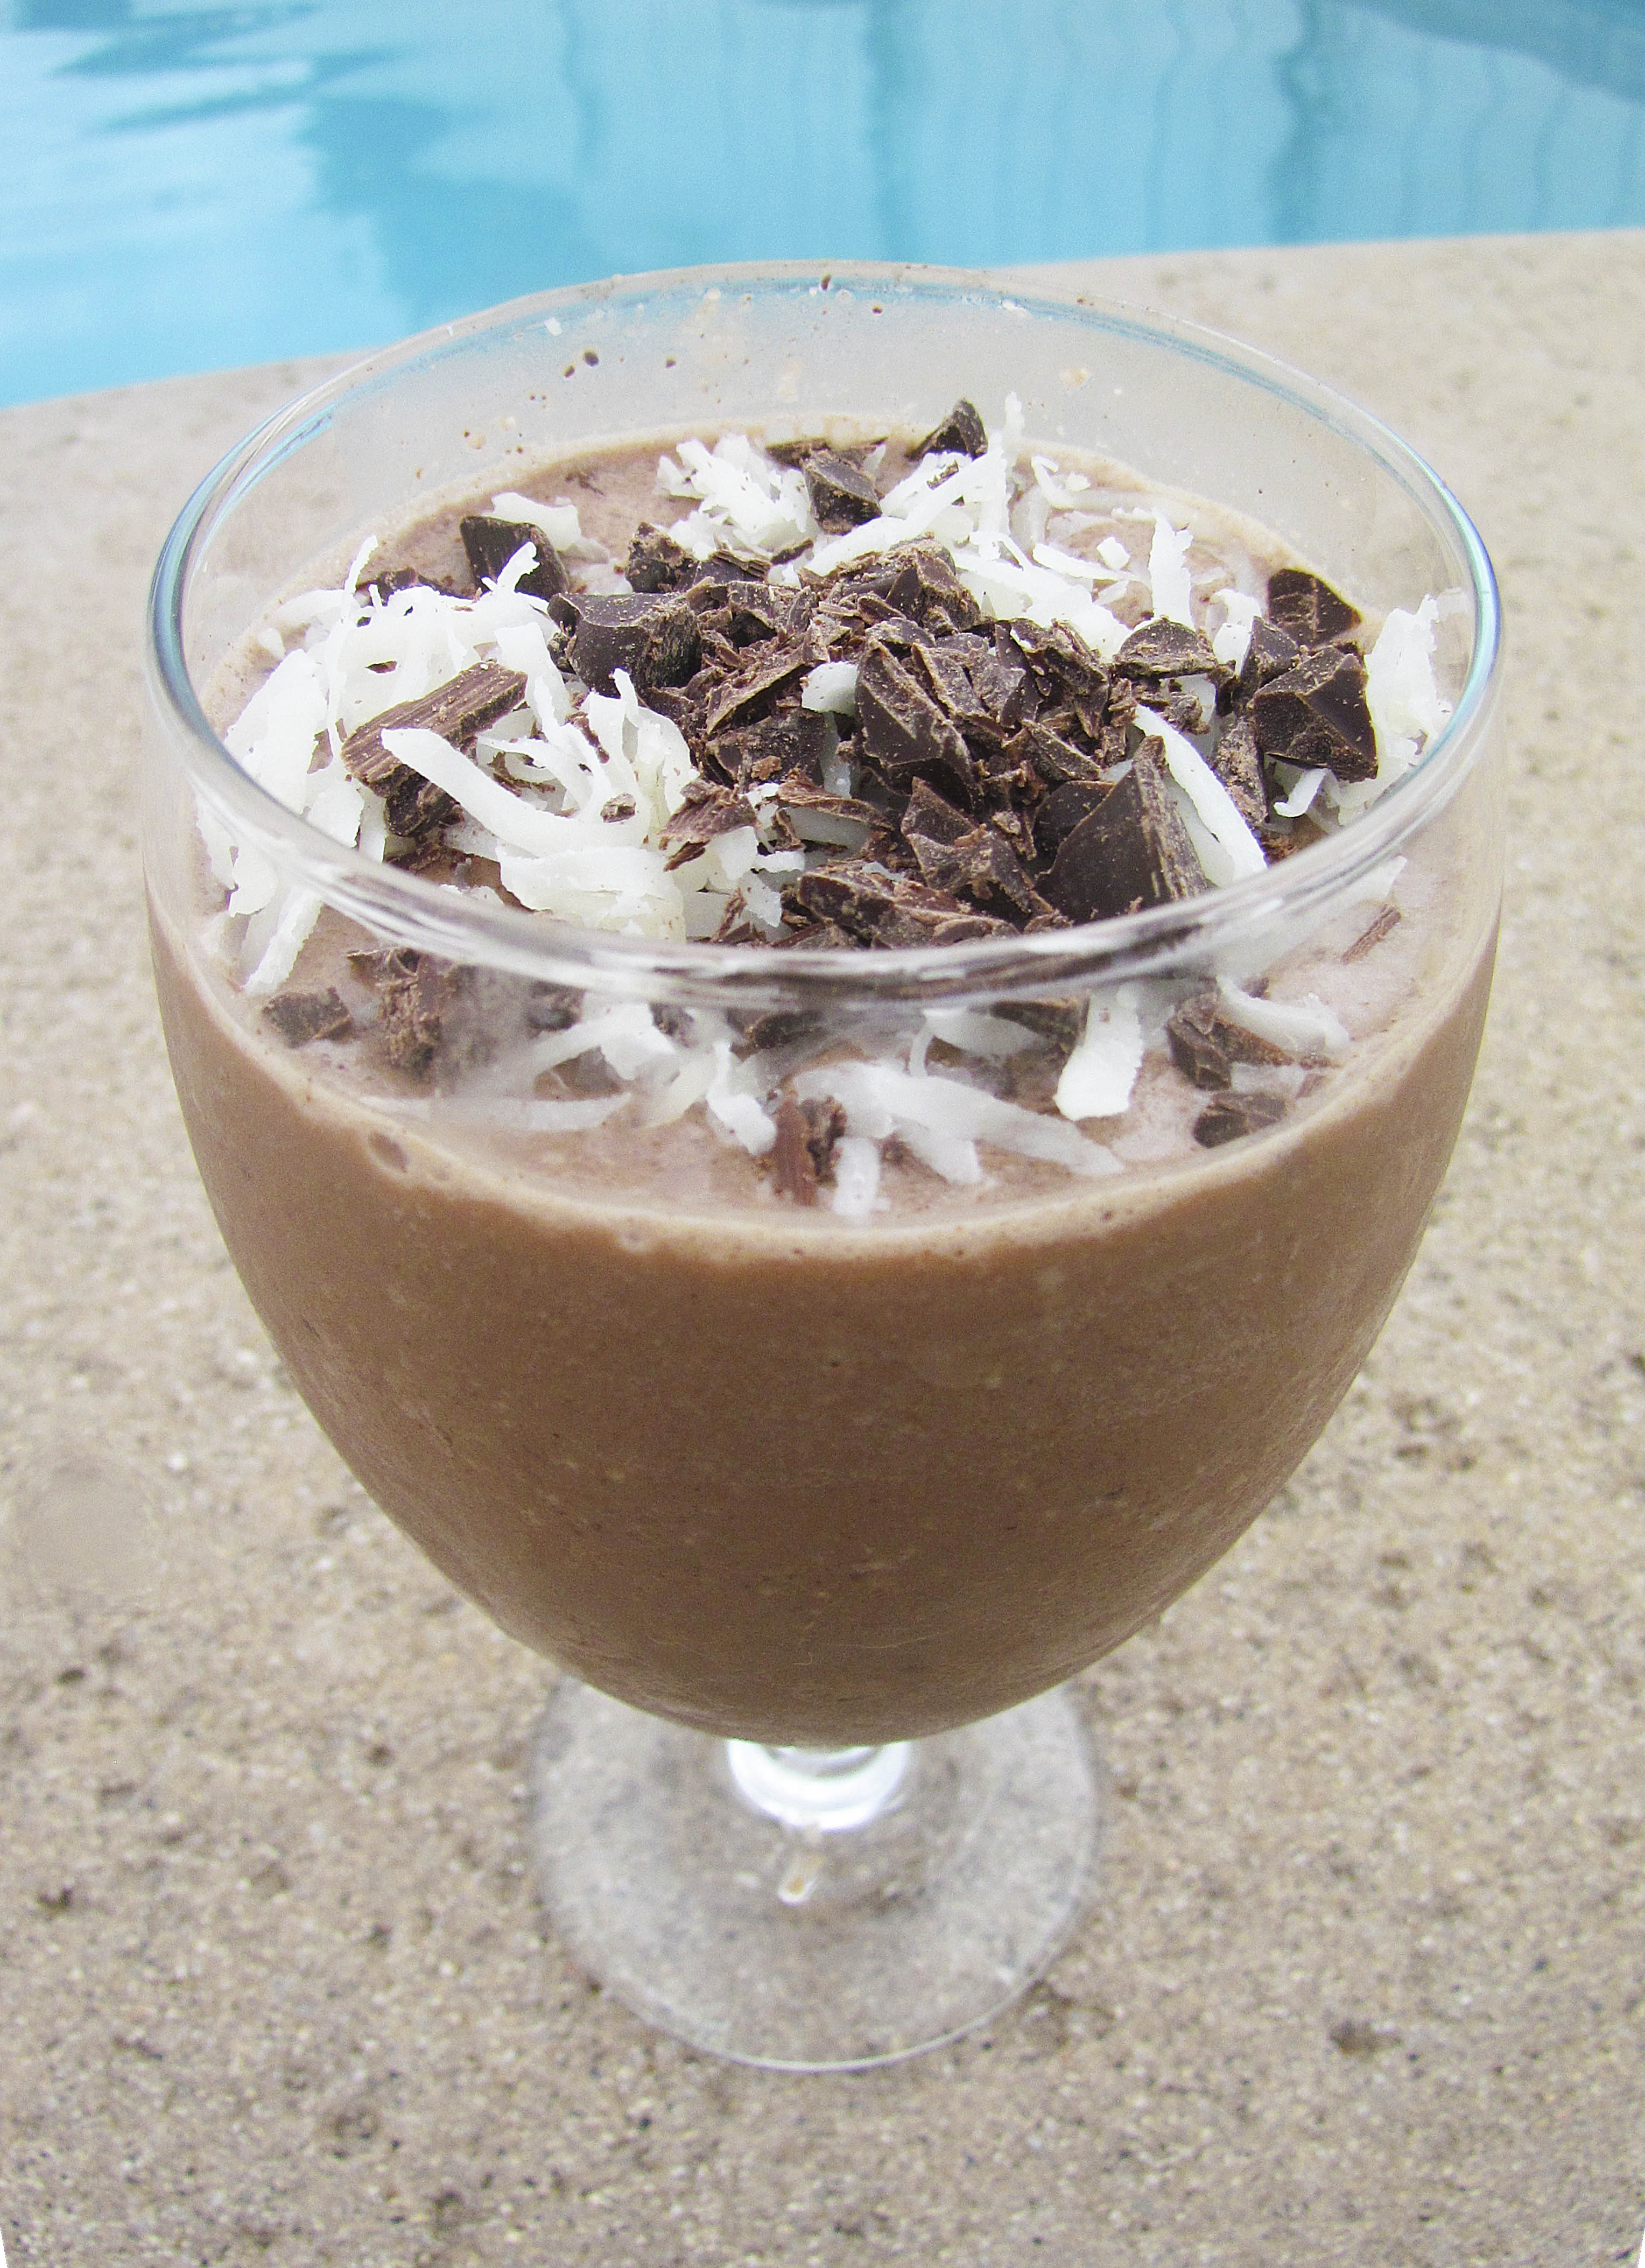 http://www.foodielovesfitness.com/wp-content/uploads/2015/04/chocolate-coconut-caramel-smoothie-3.jpg